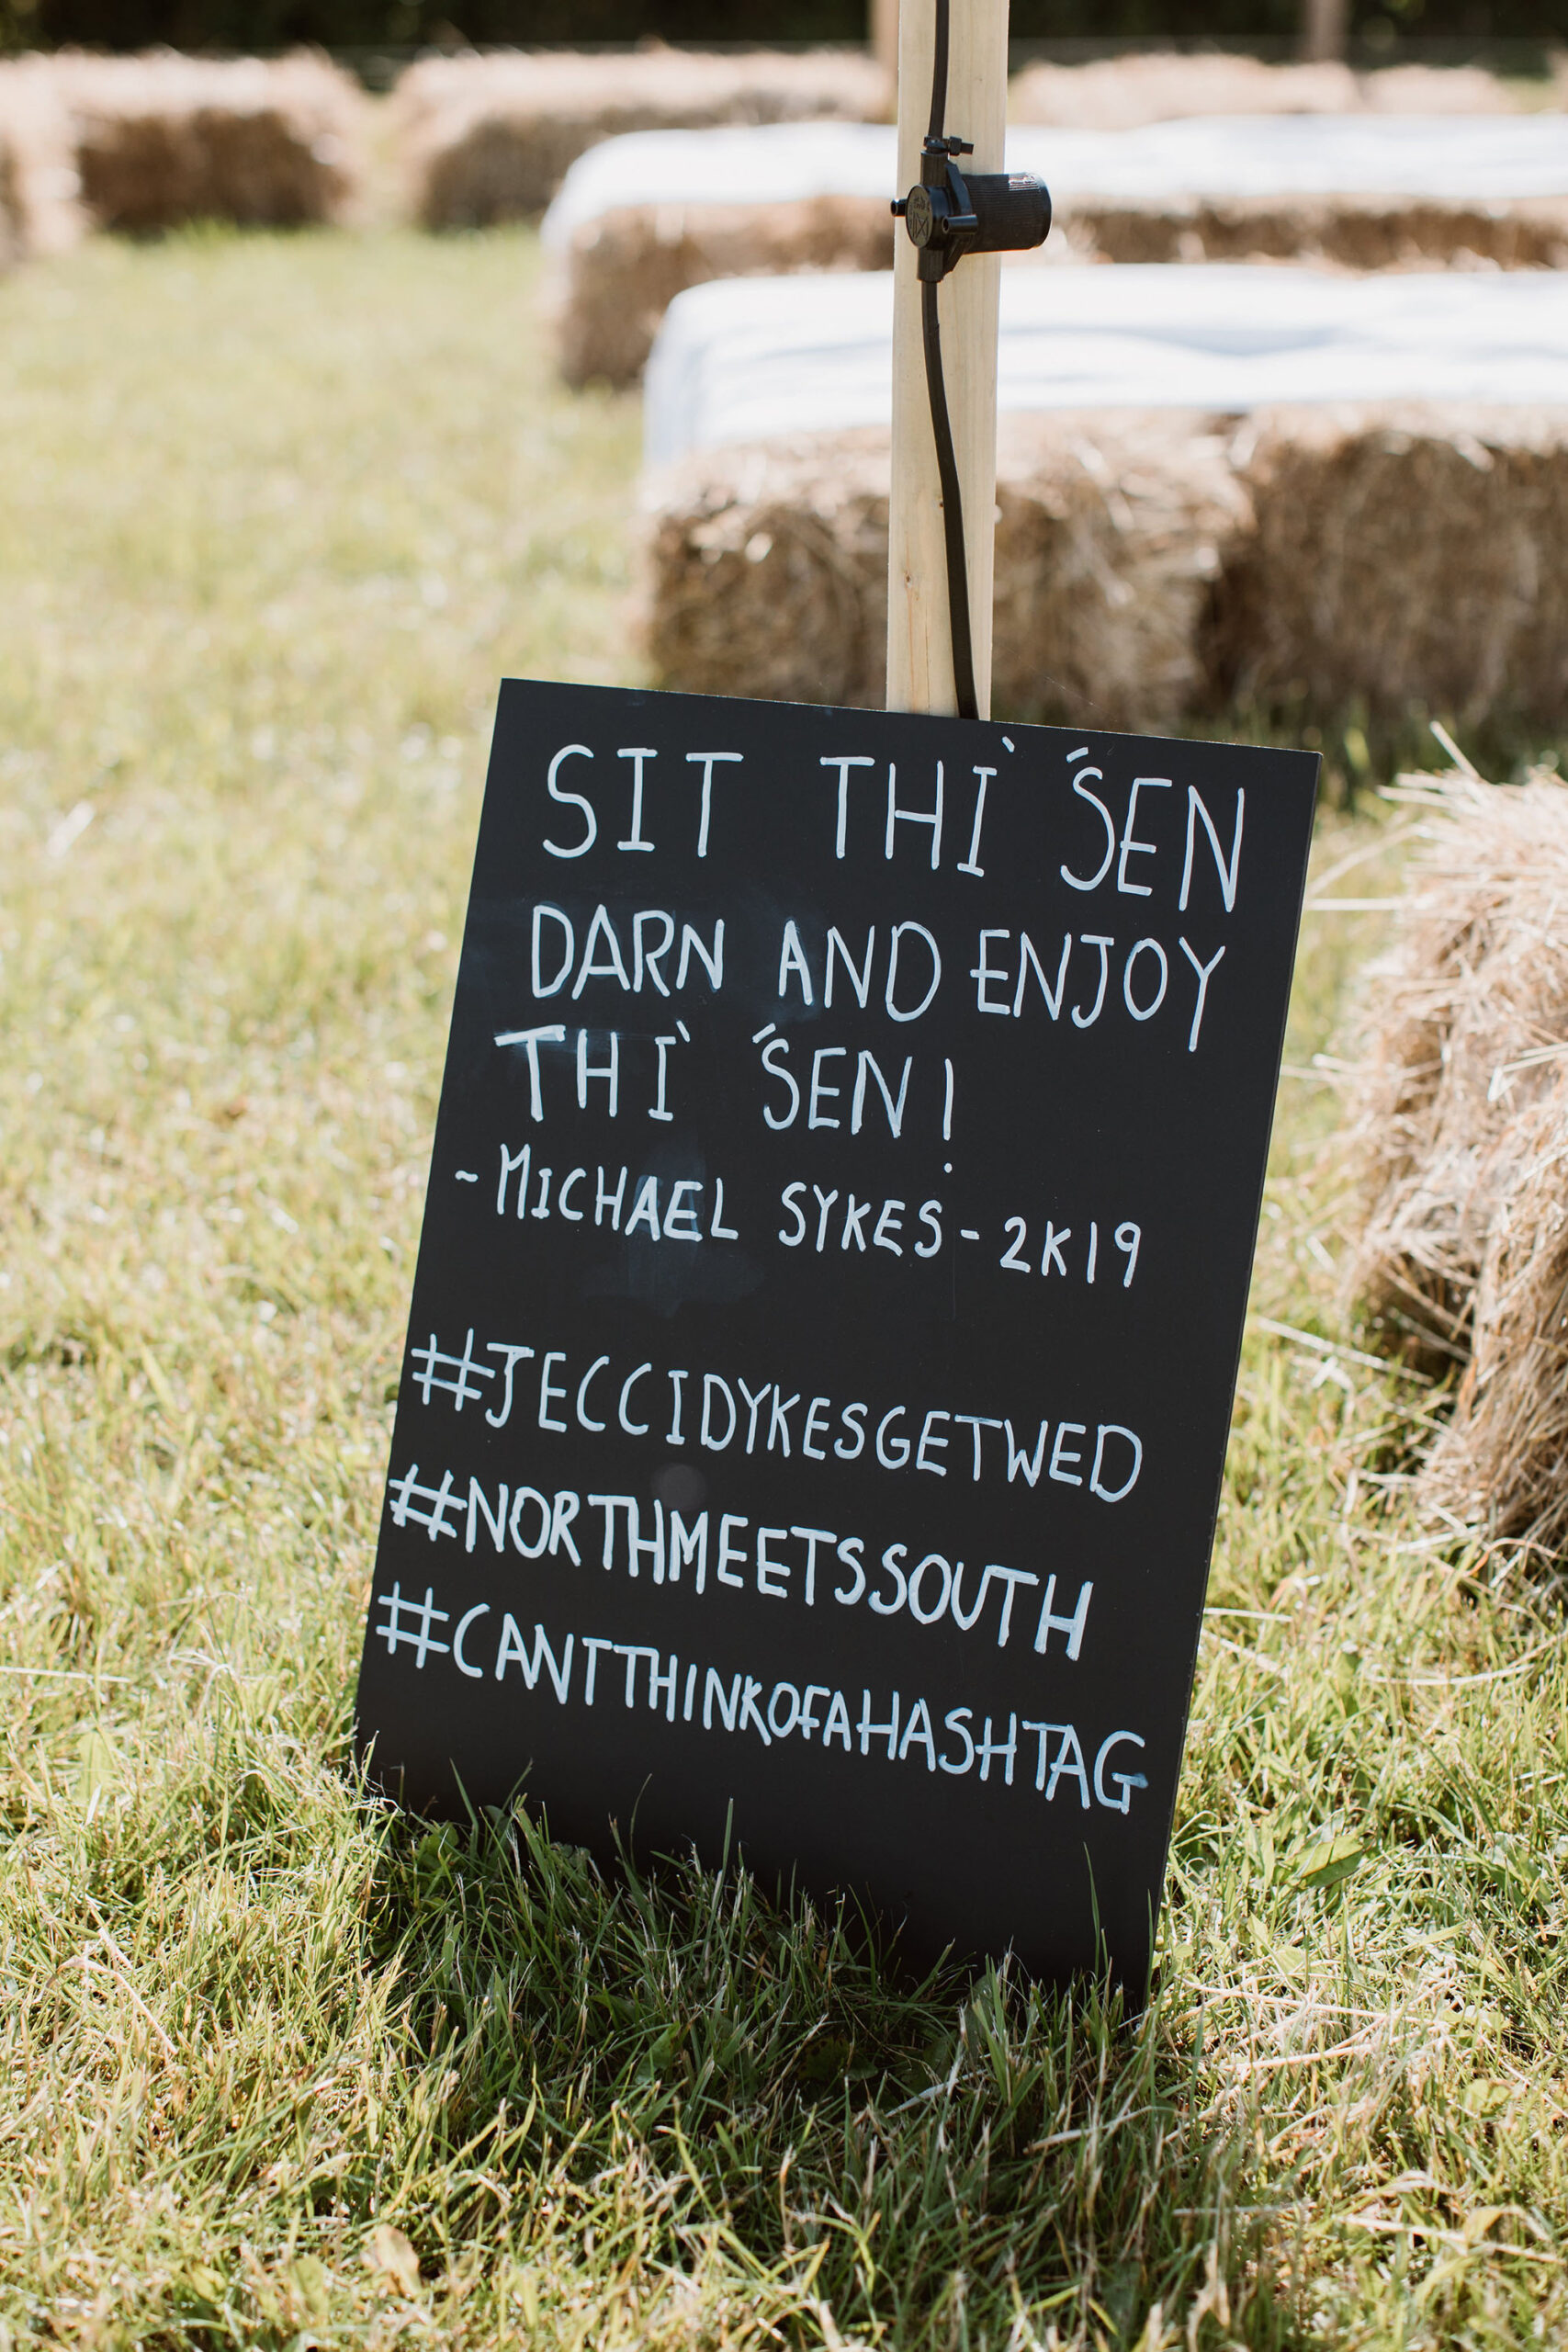 Wedding sign in a Yorkshire dialect - Sit thi sen darn and enjoy thi sen - white ink on chalkboard. Wedding image by Luke Hayden Photography